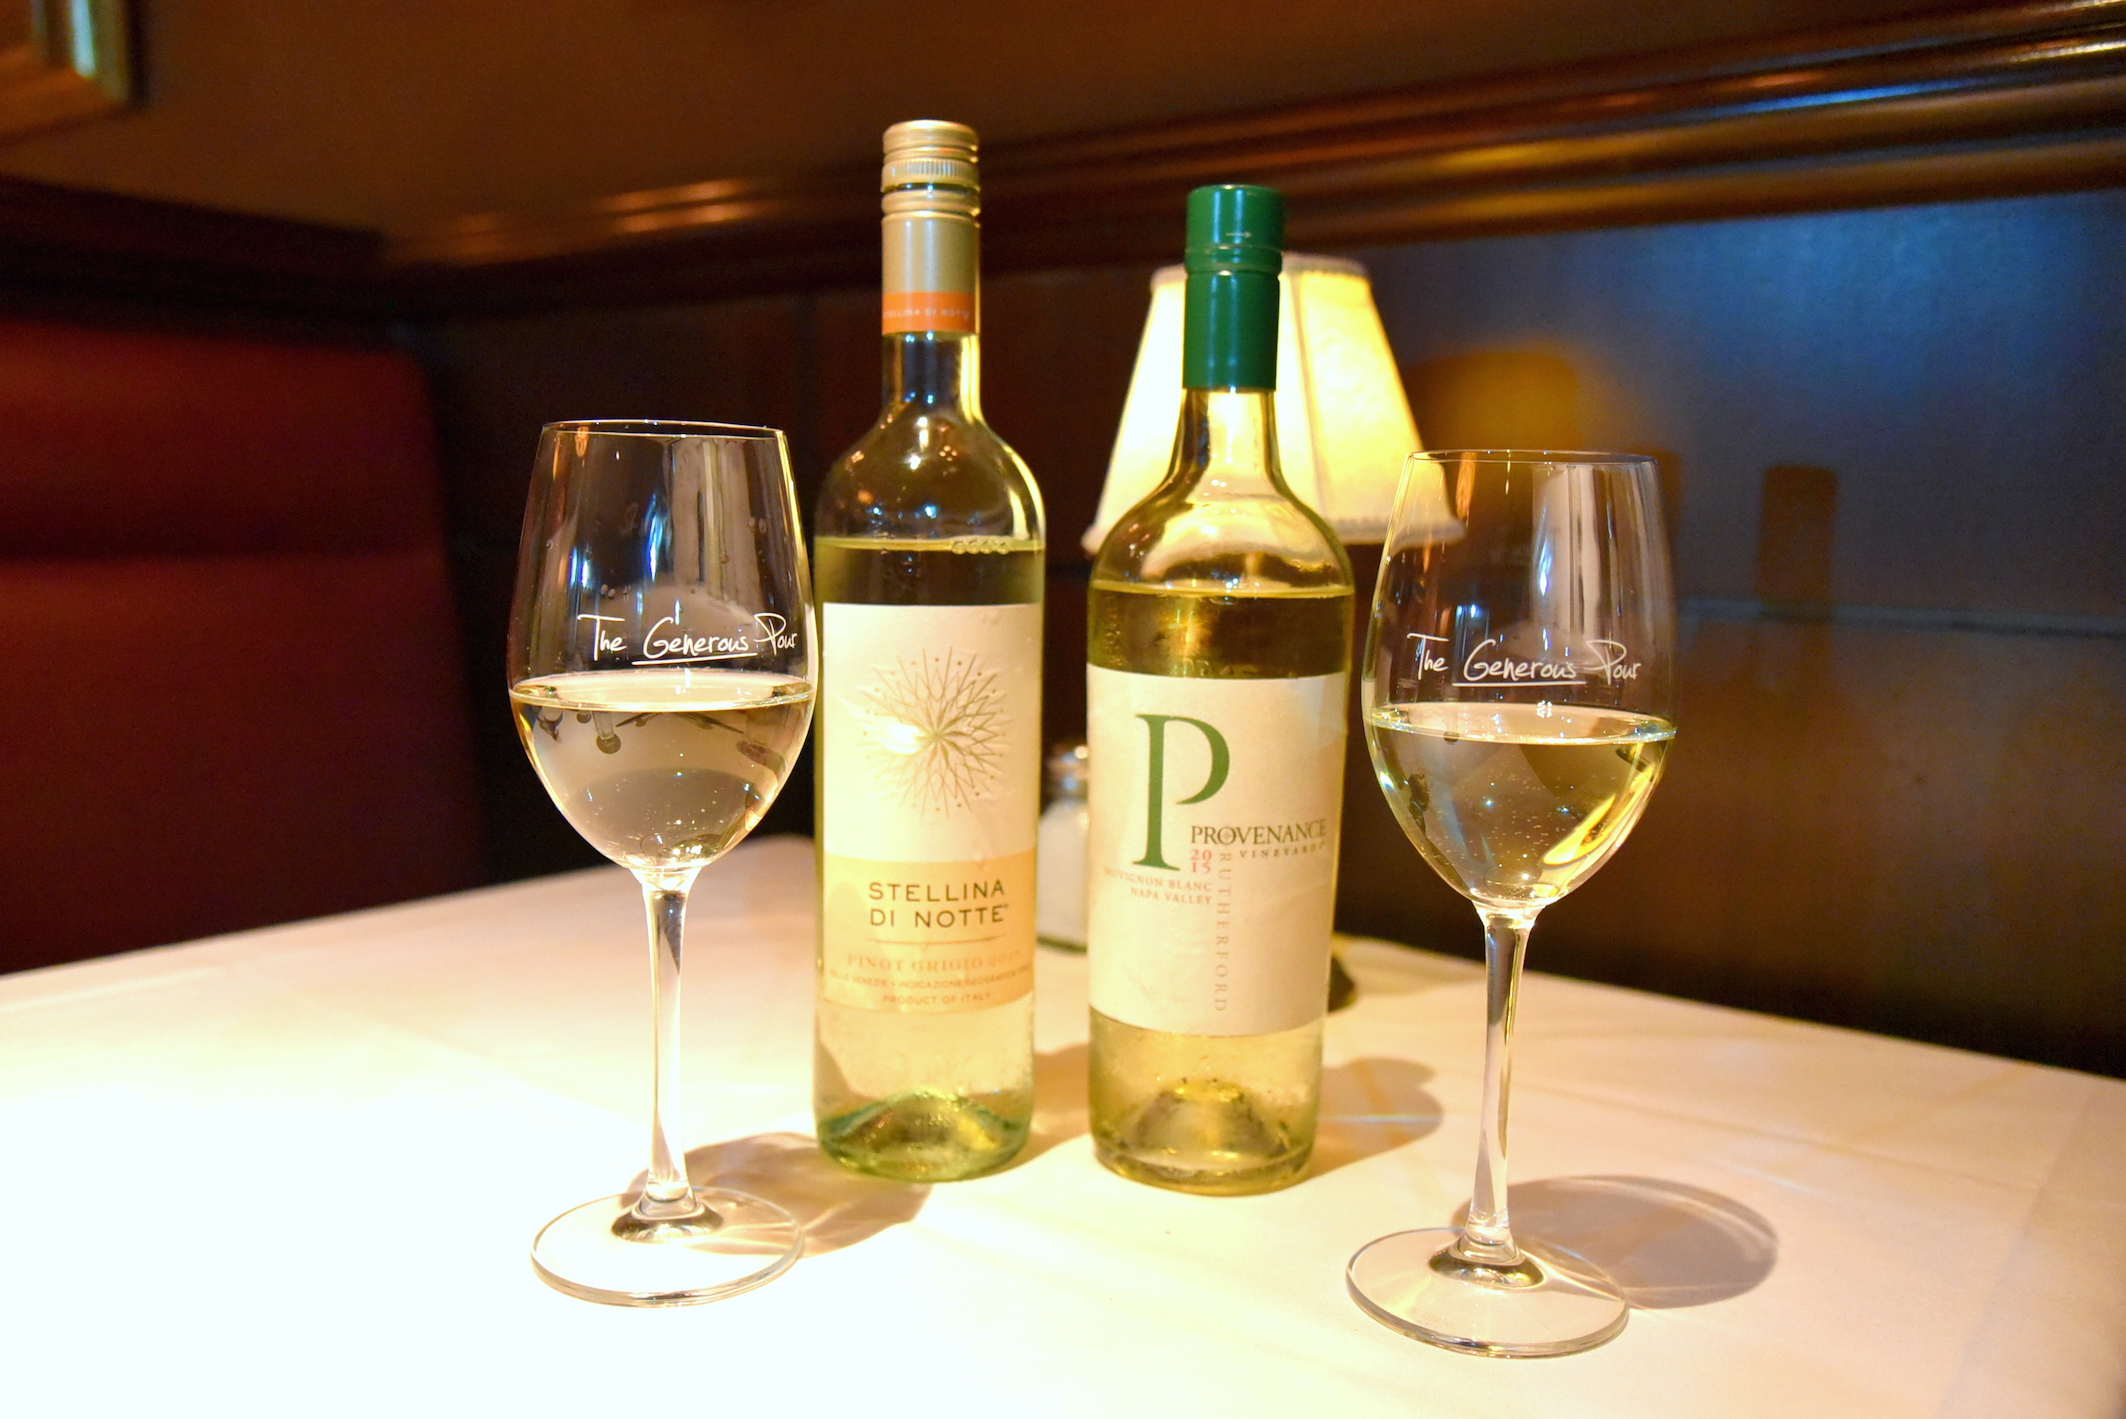 Wine selection at the Capital Grille New York